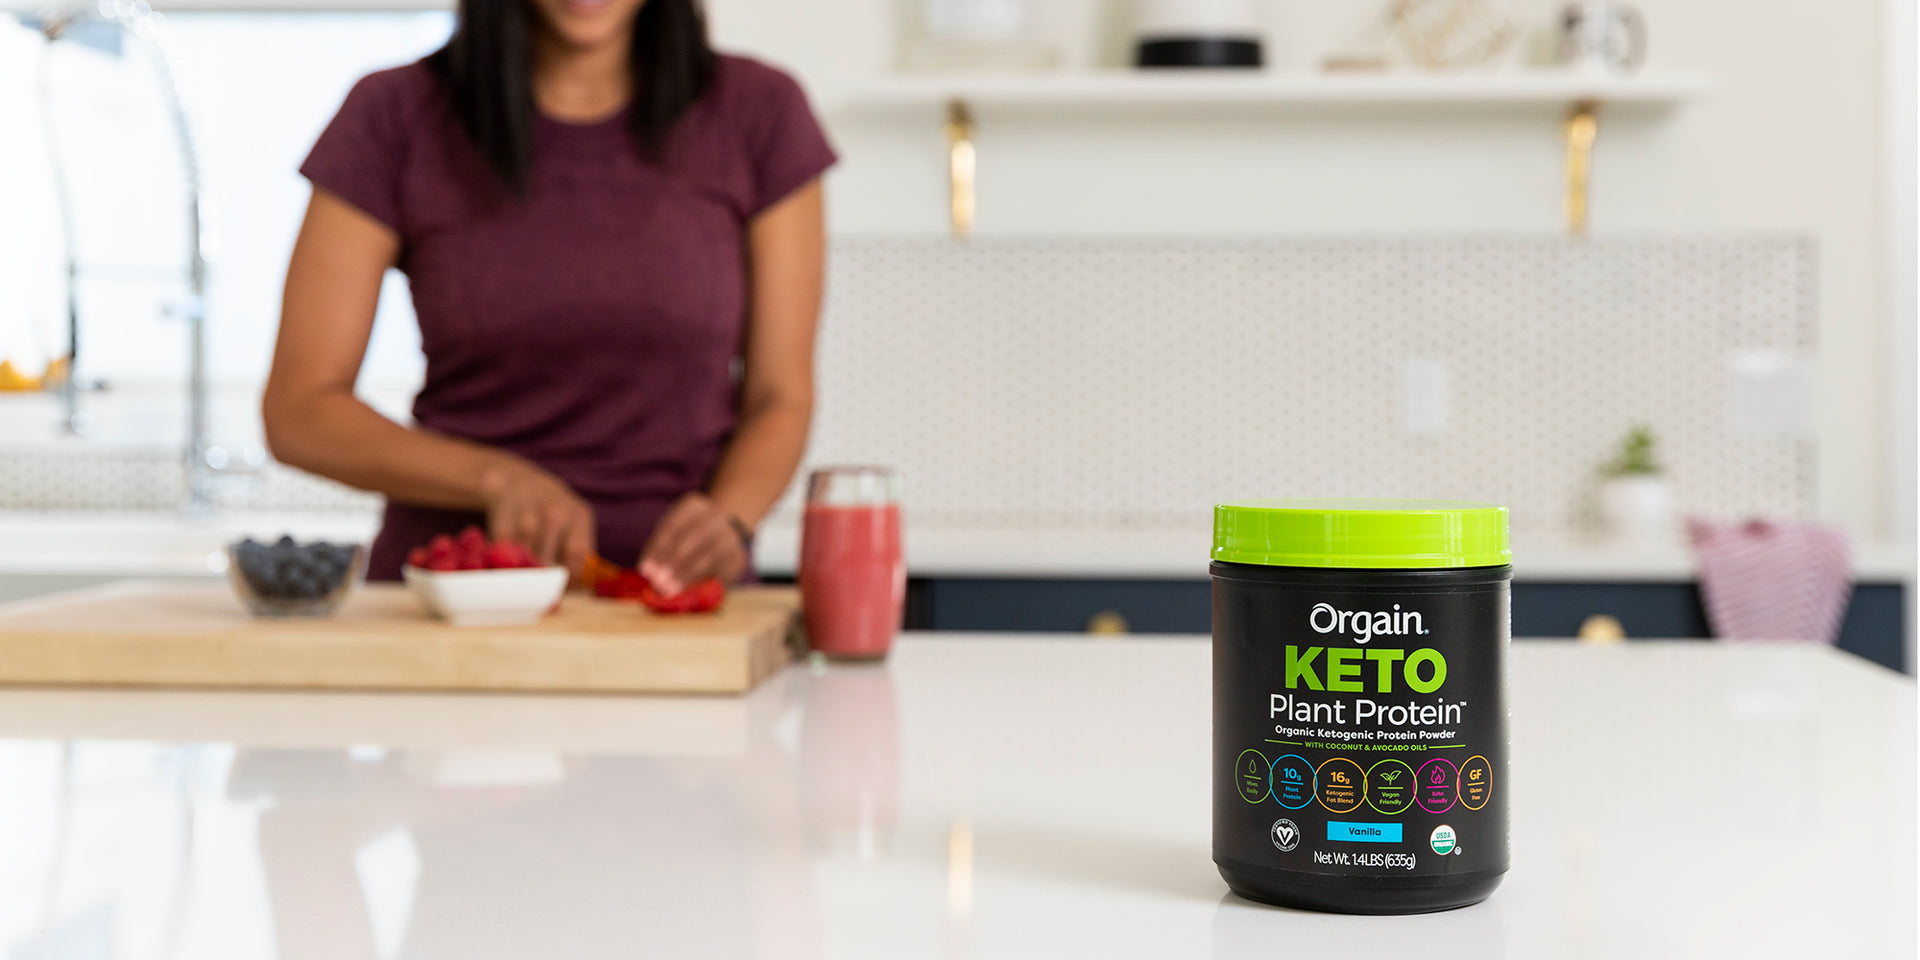 Introducing the NEW Orgain Keto Plant Protein Powder